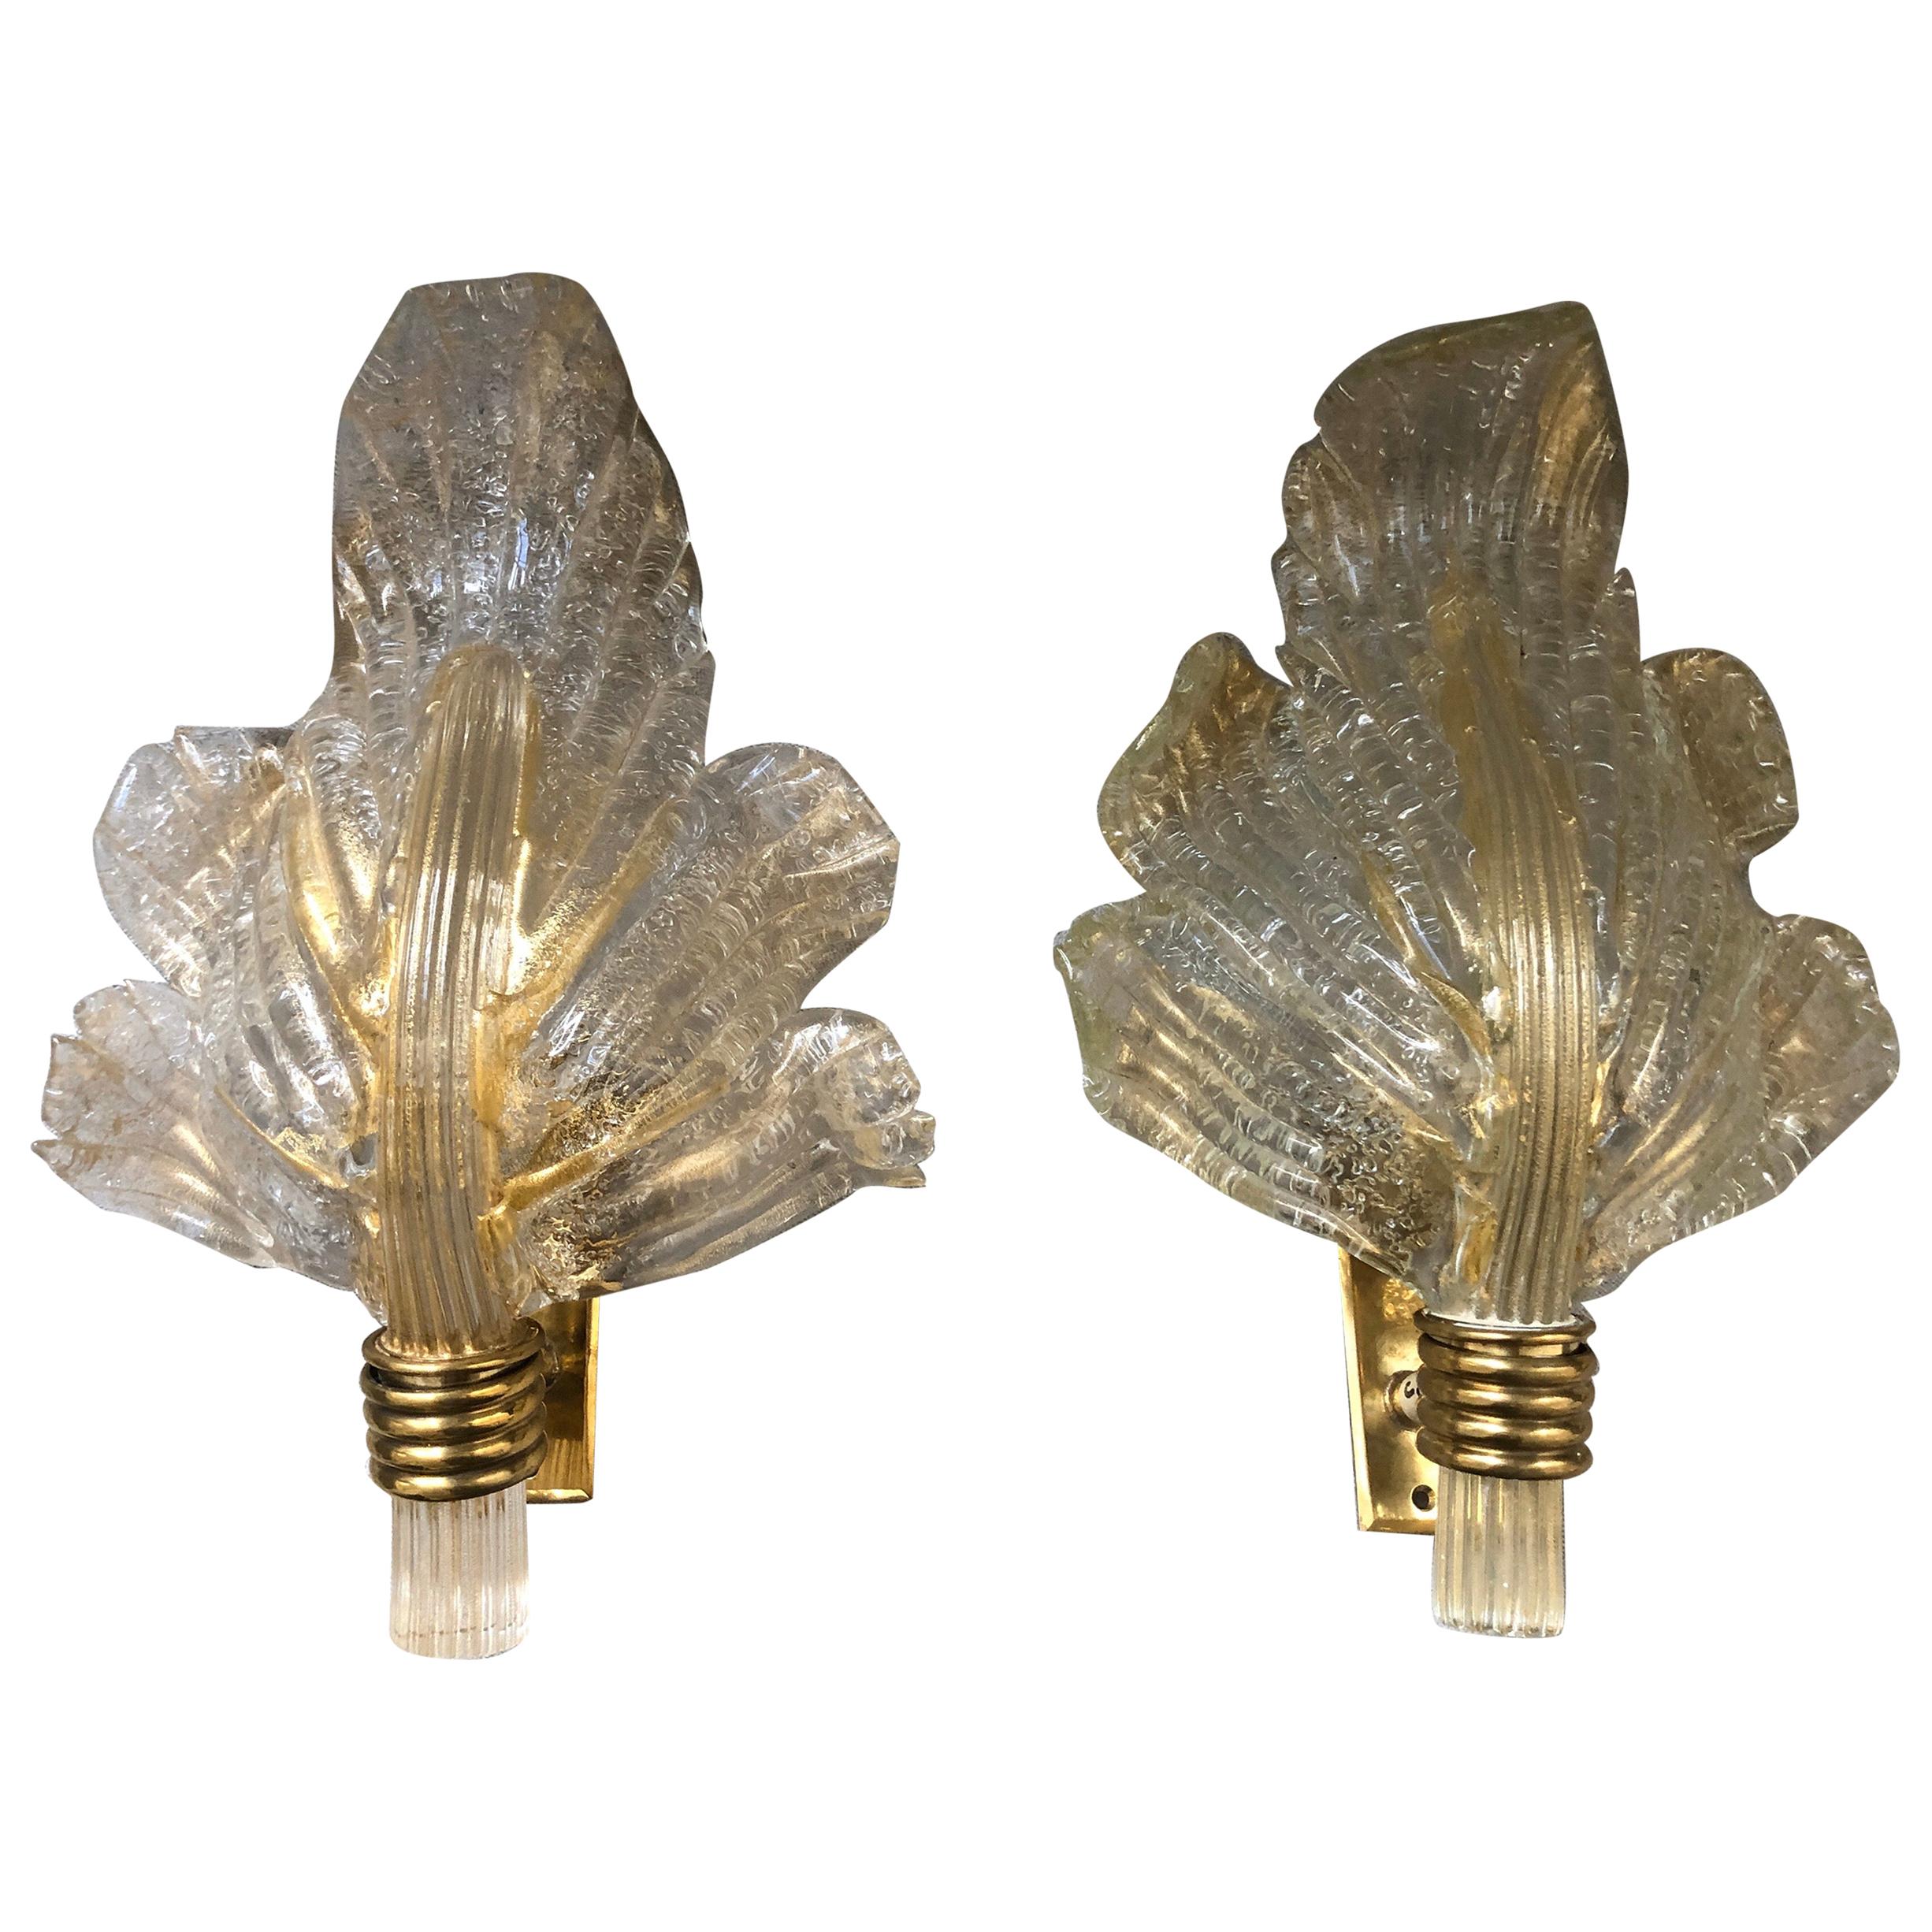 Pair of Murano 24-Karat Gold Flaked Crystal Wall Lights Leaf by Segusso, 1950s